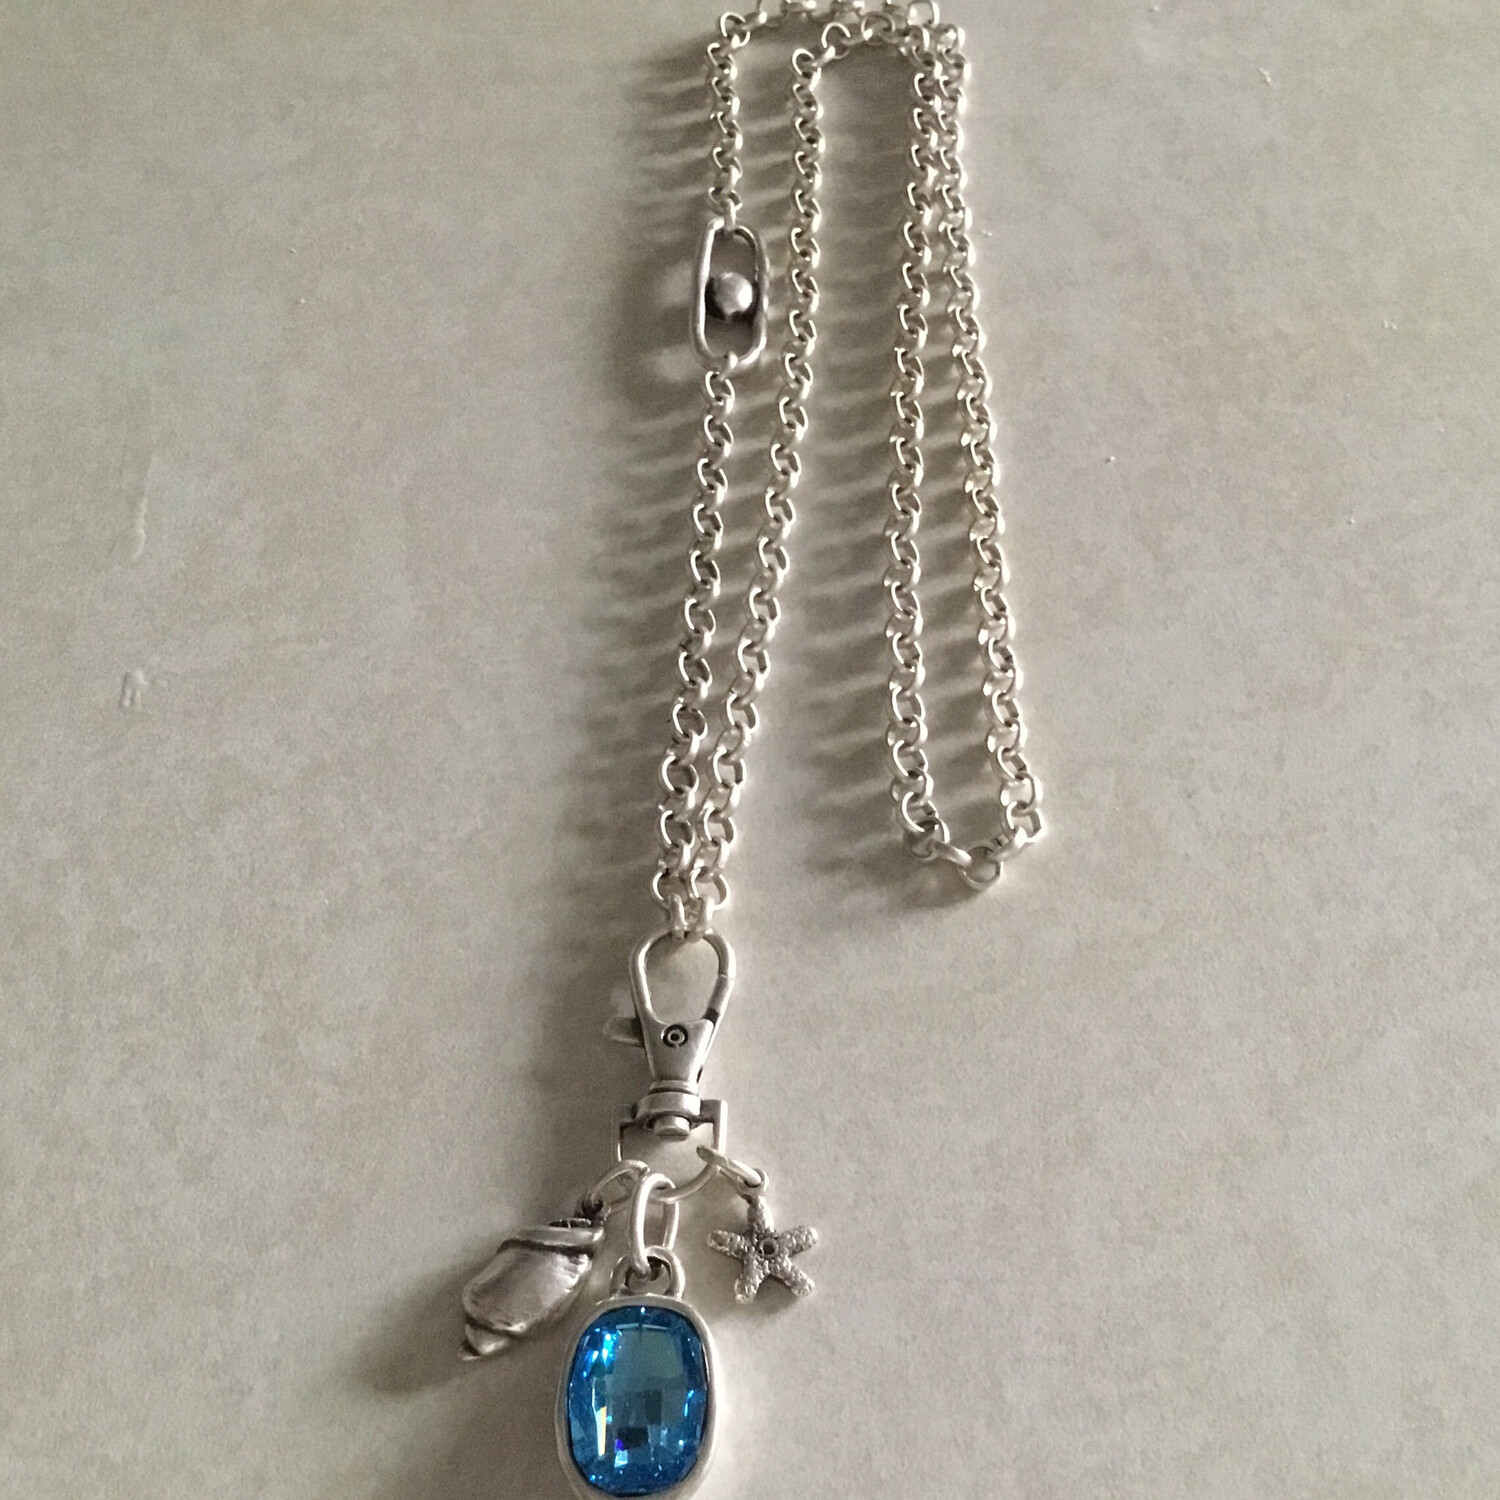 Long Handmade Pewter Necklace With Beautiful Blue Stone And Sea Creatures